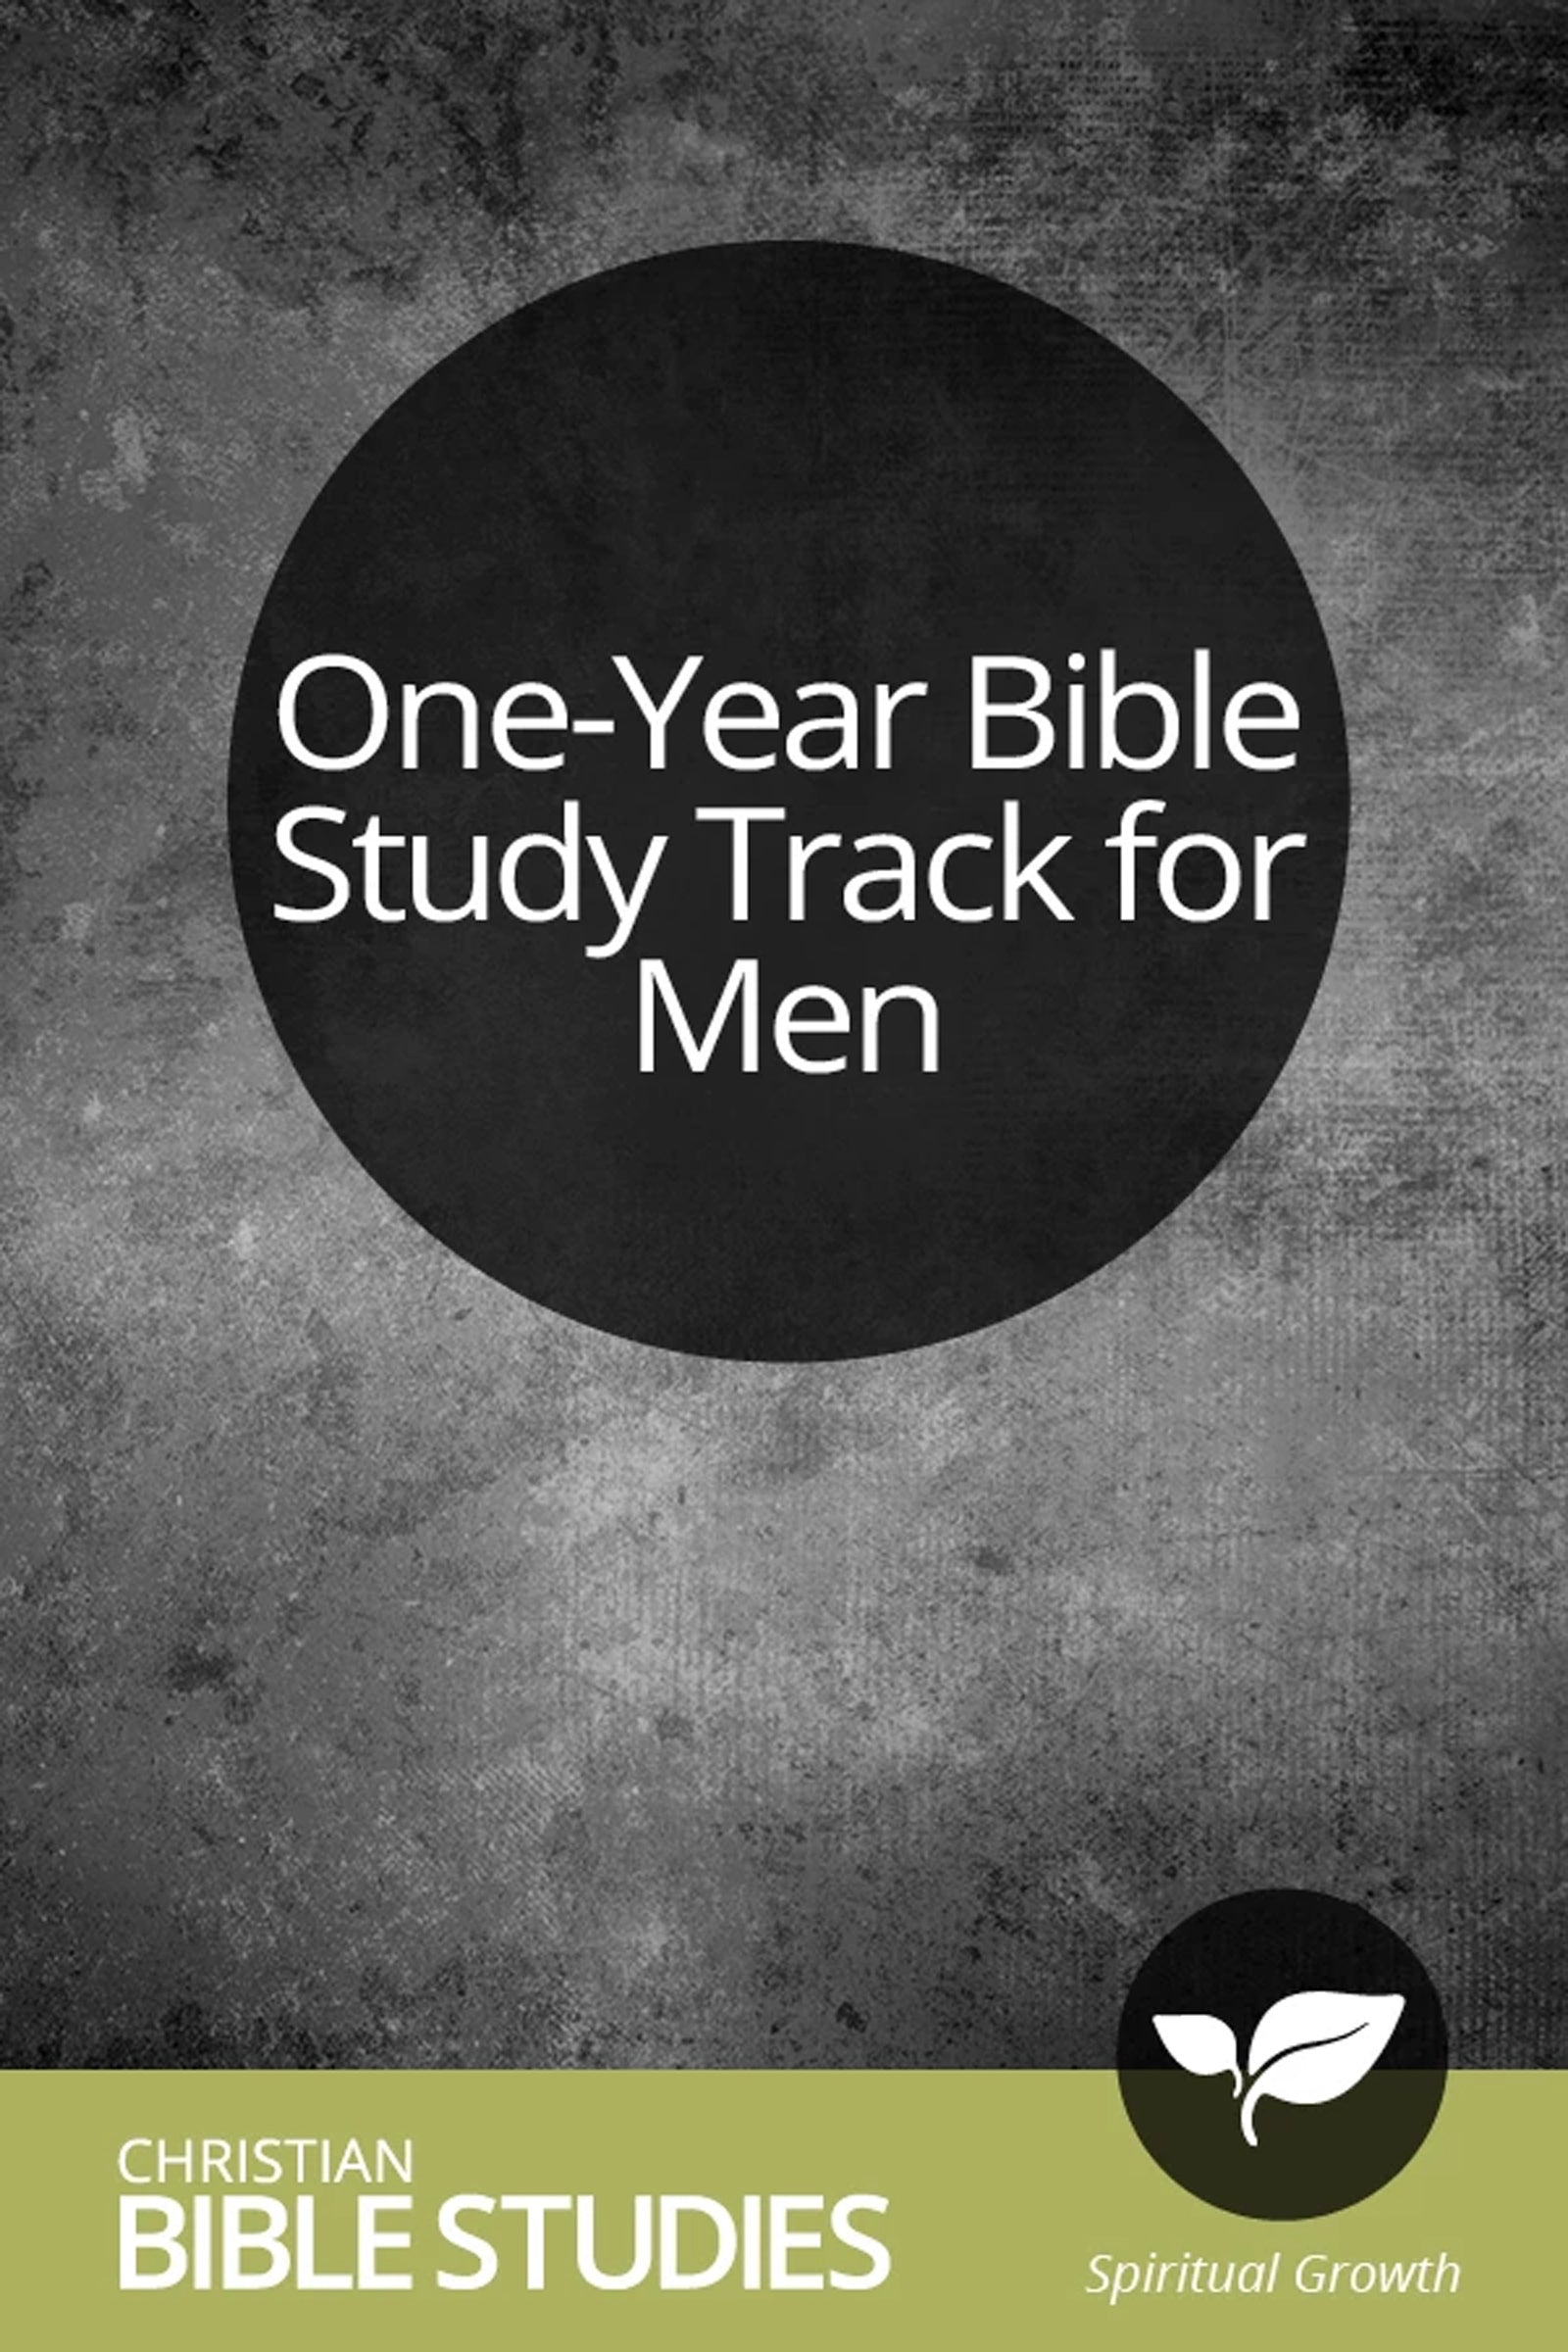 One-Year Bible Study Track for Men